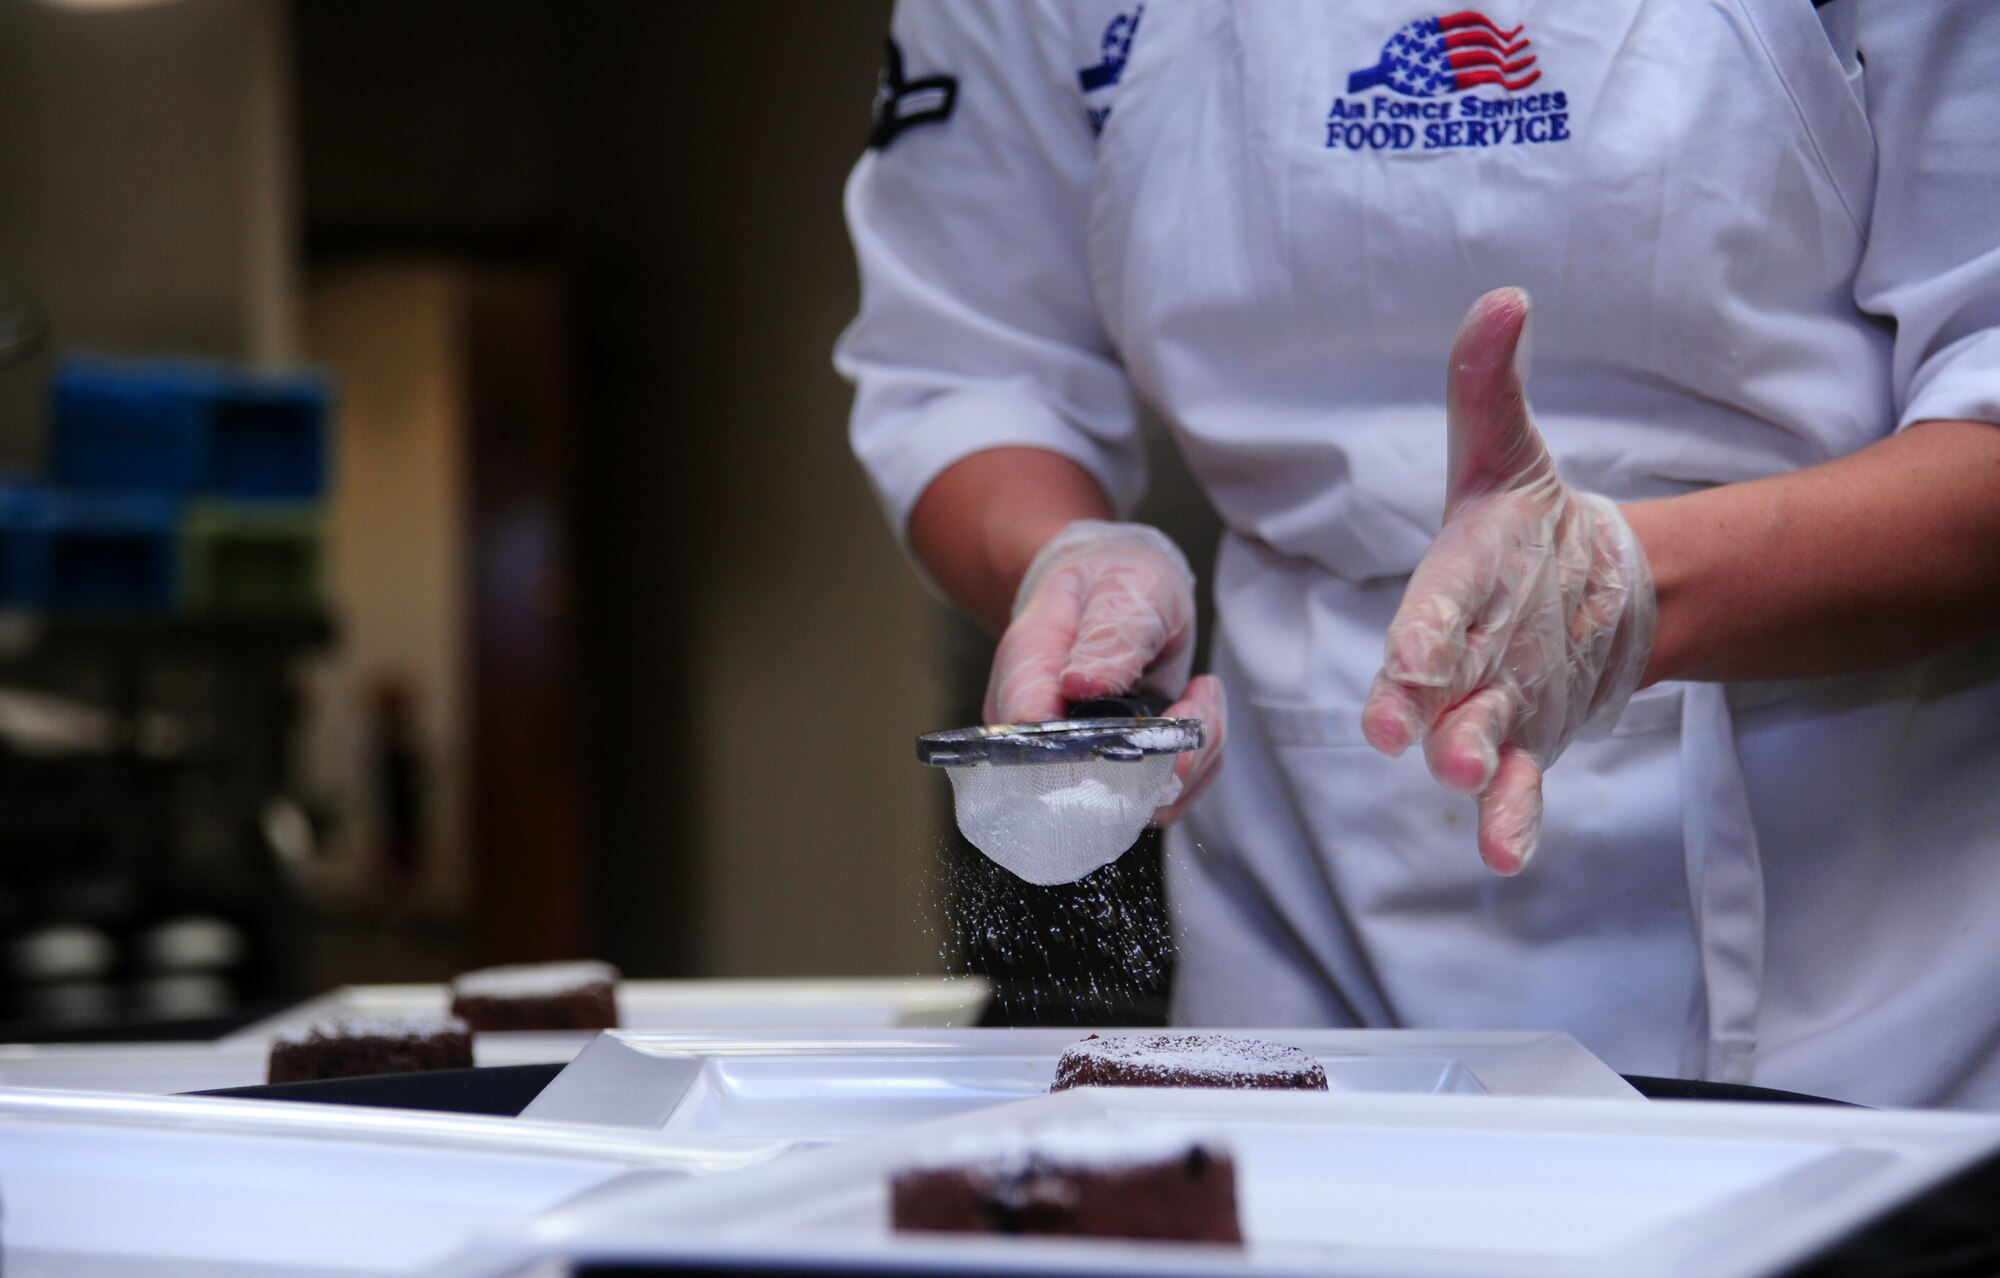 Airman Kayla Rollins, a food services specialist for the 509th Force Support Squadron, adds the final touches to the blue team’s dessert dish during the Global Strike Iron Chef Challenge at Whiteman Air Force Base, Mo., Sept. 4, 2015. The hour-long competition tested two teams’ ability to work together, as well as individually.
(U.S. Air Force photo by Airman 1st Class Jovan Banks/Released)

